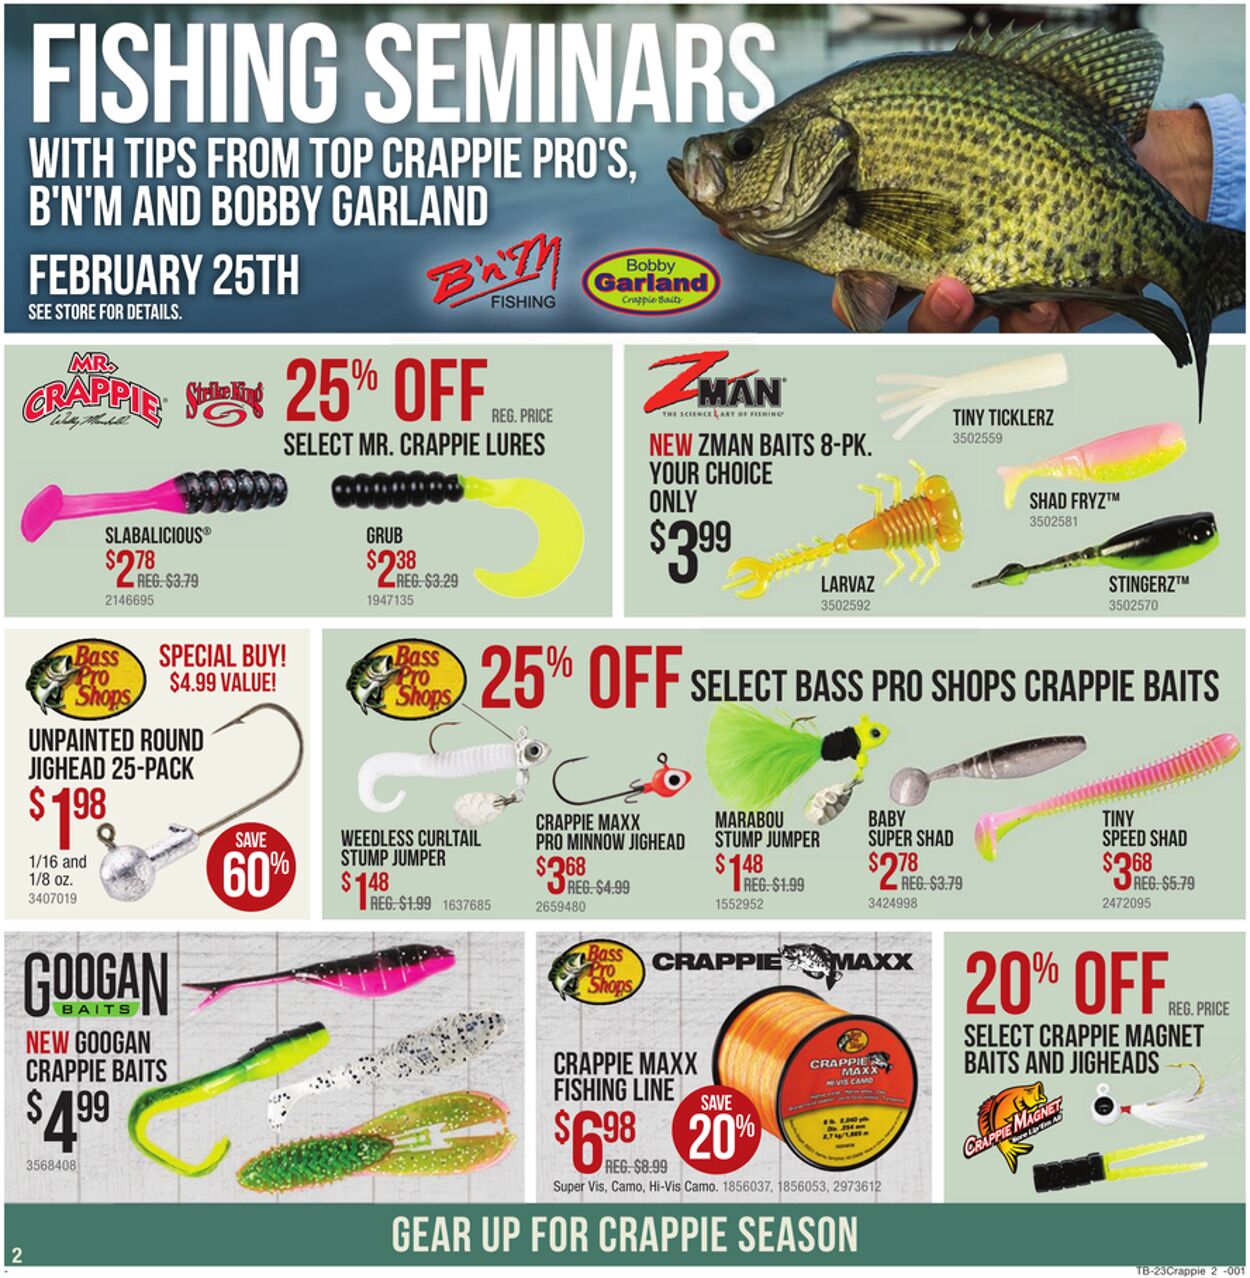 Weekly ad Cabela's 02/23/2023 - 03/08/2023